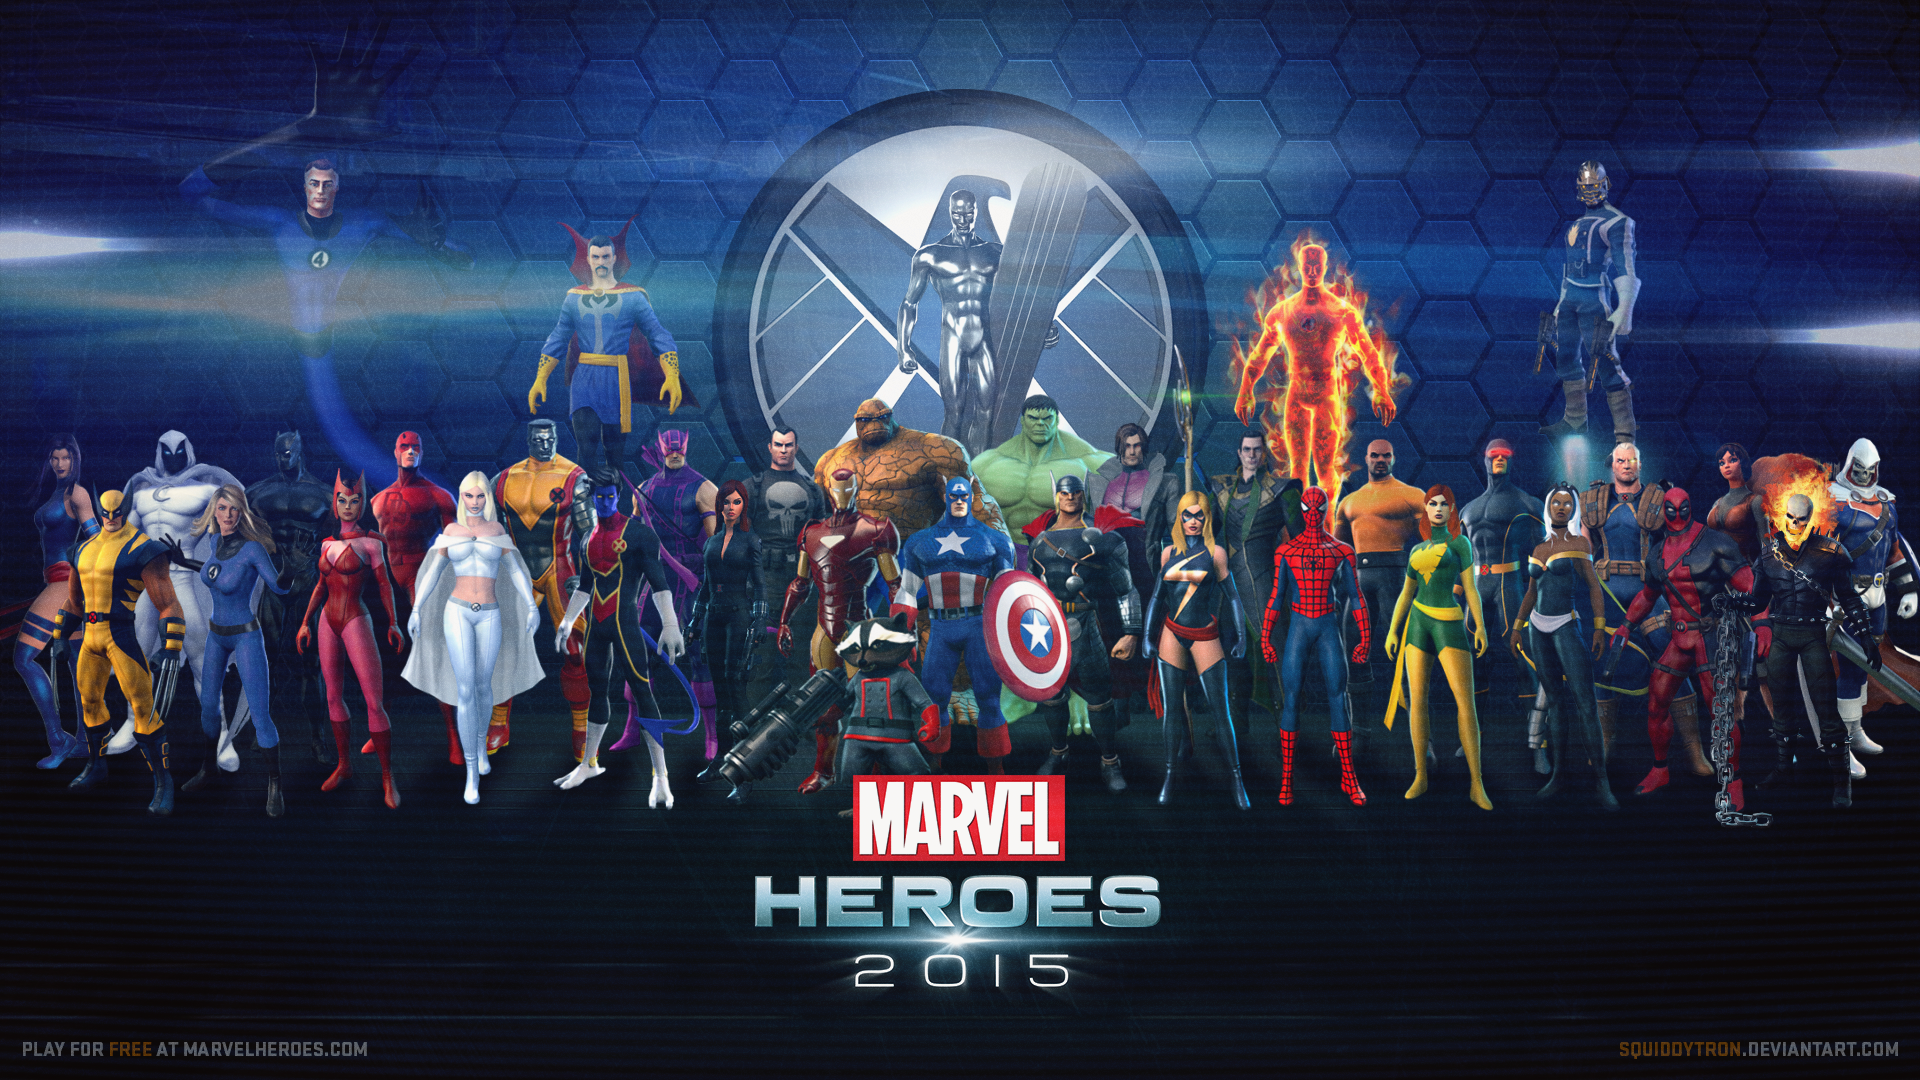 Marvel Heroes Wallpaper UPDATED w STAR LORD Marvel